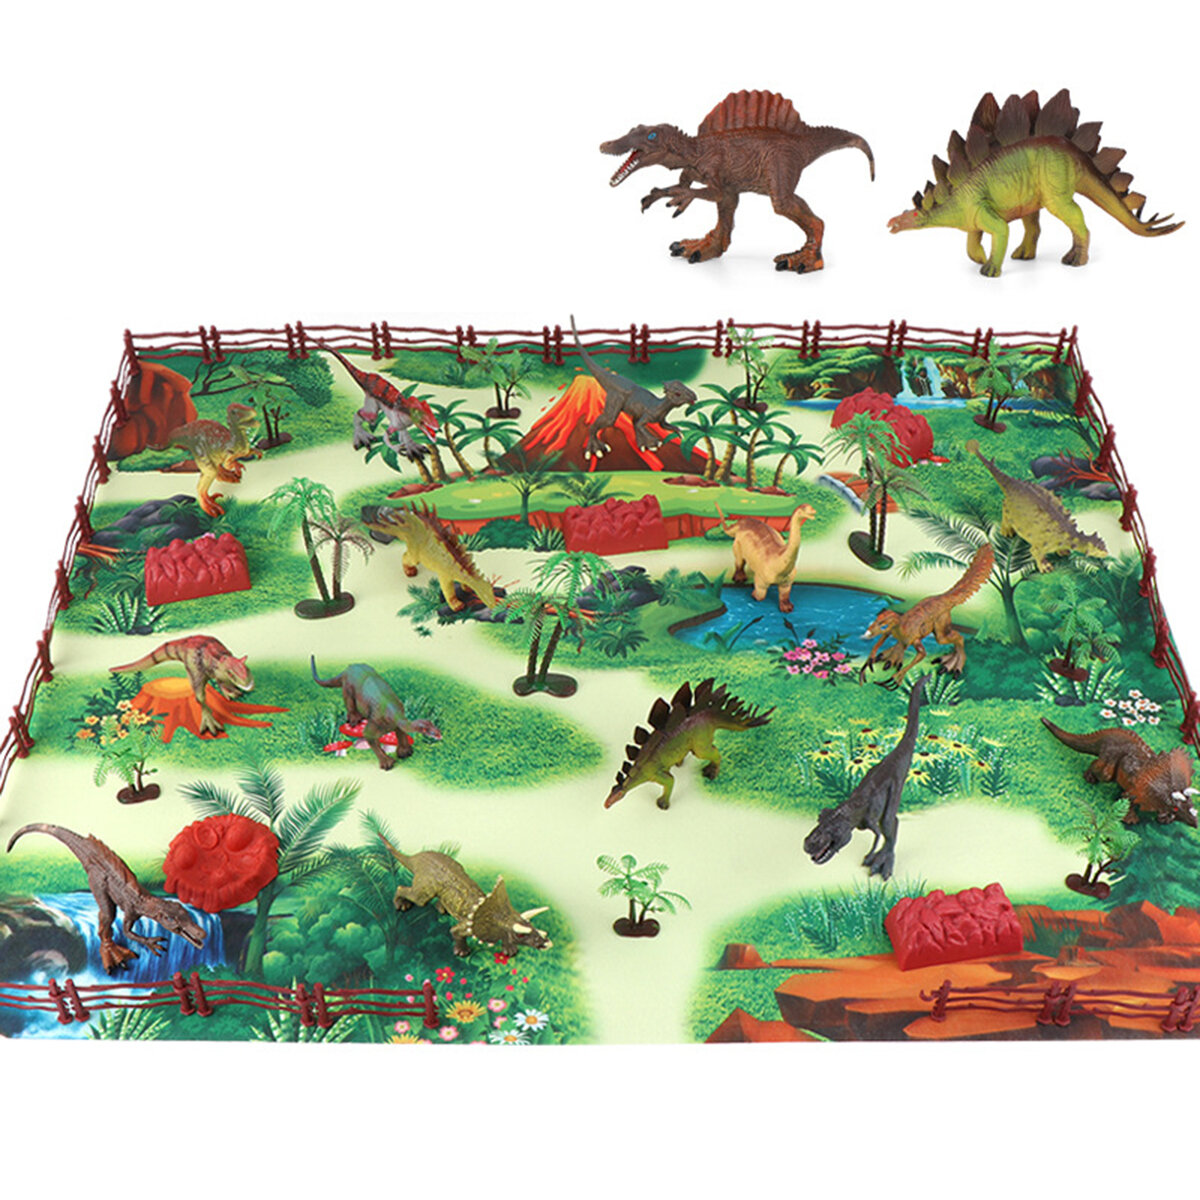 28/33/34/63/65Pcs Multi-style Diecast Dinosaurs Model Play Set Educational Toy with Play Mat for Kid